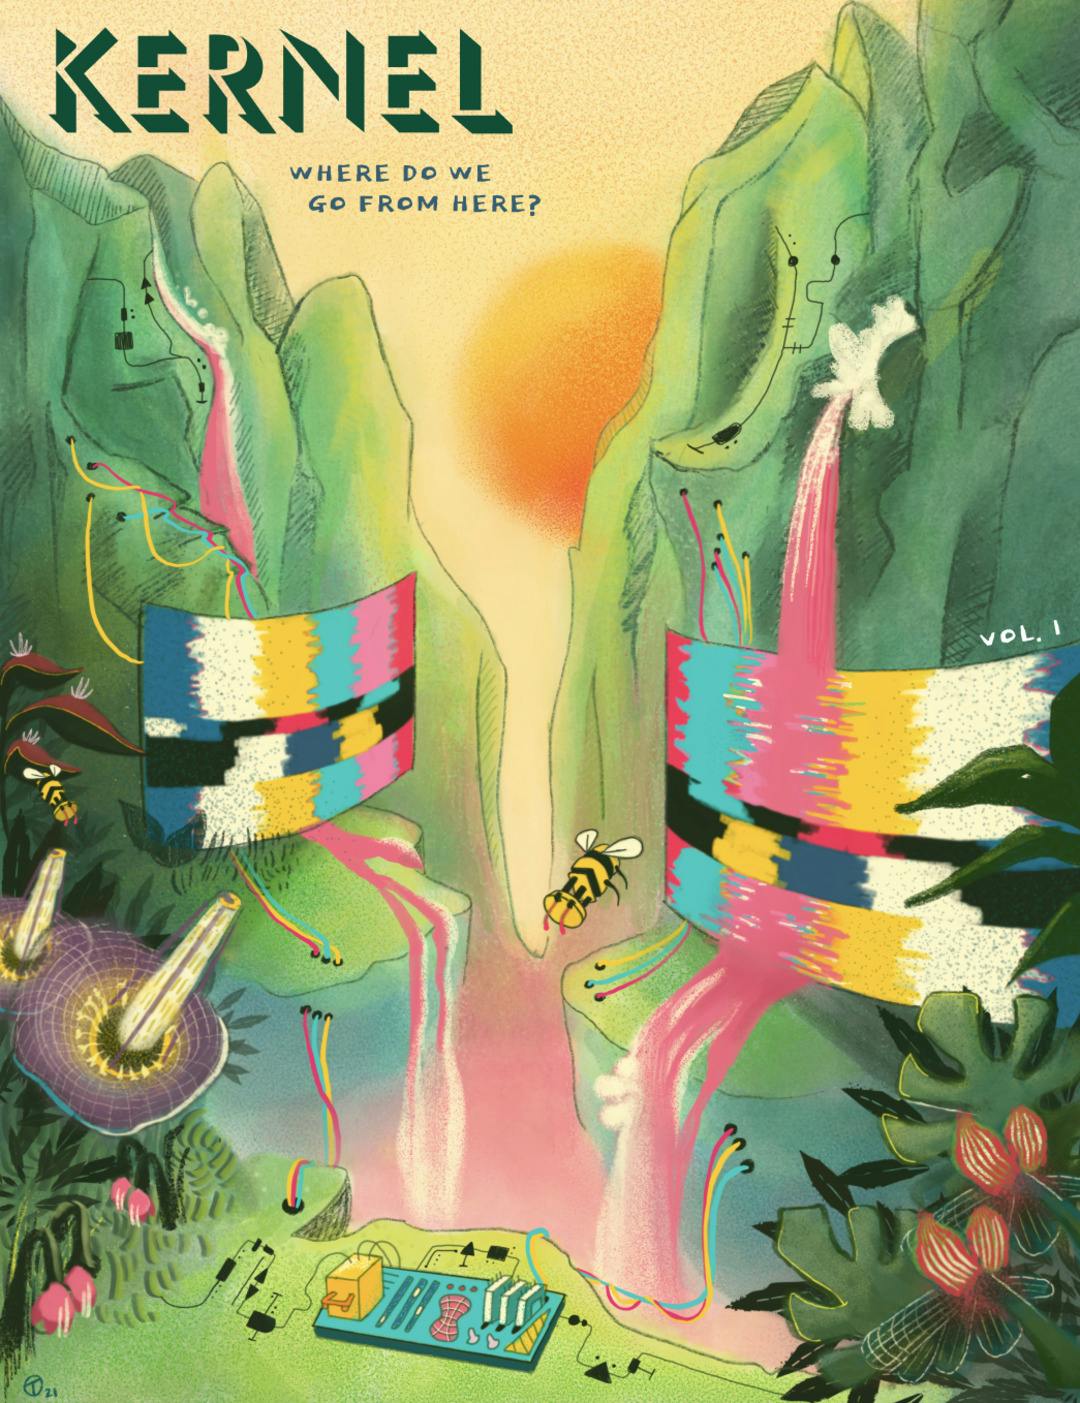 Cover image art for issue 2 of Kernel Magaizne. The sky is blue at the top and pink at the bottom, with soft clouds and two rectangular window-like openings through which the sun is shining down. There is a green mountain in the distance, behind which the word Kernel emerges, below which the words 'How do we get there?' are written. From a large hole in the base of the mountain emerges a train from which happy figures are entering, exiting, and riding.